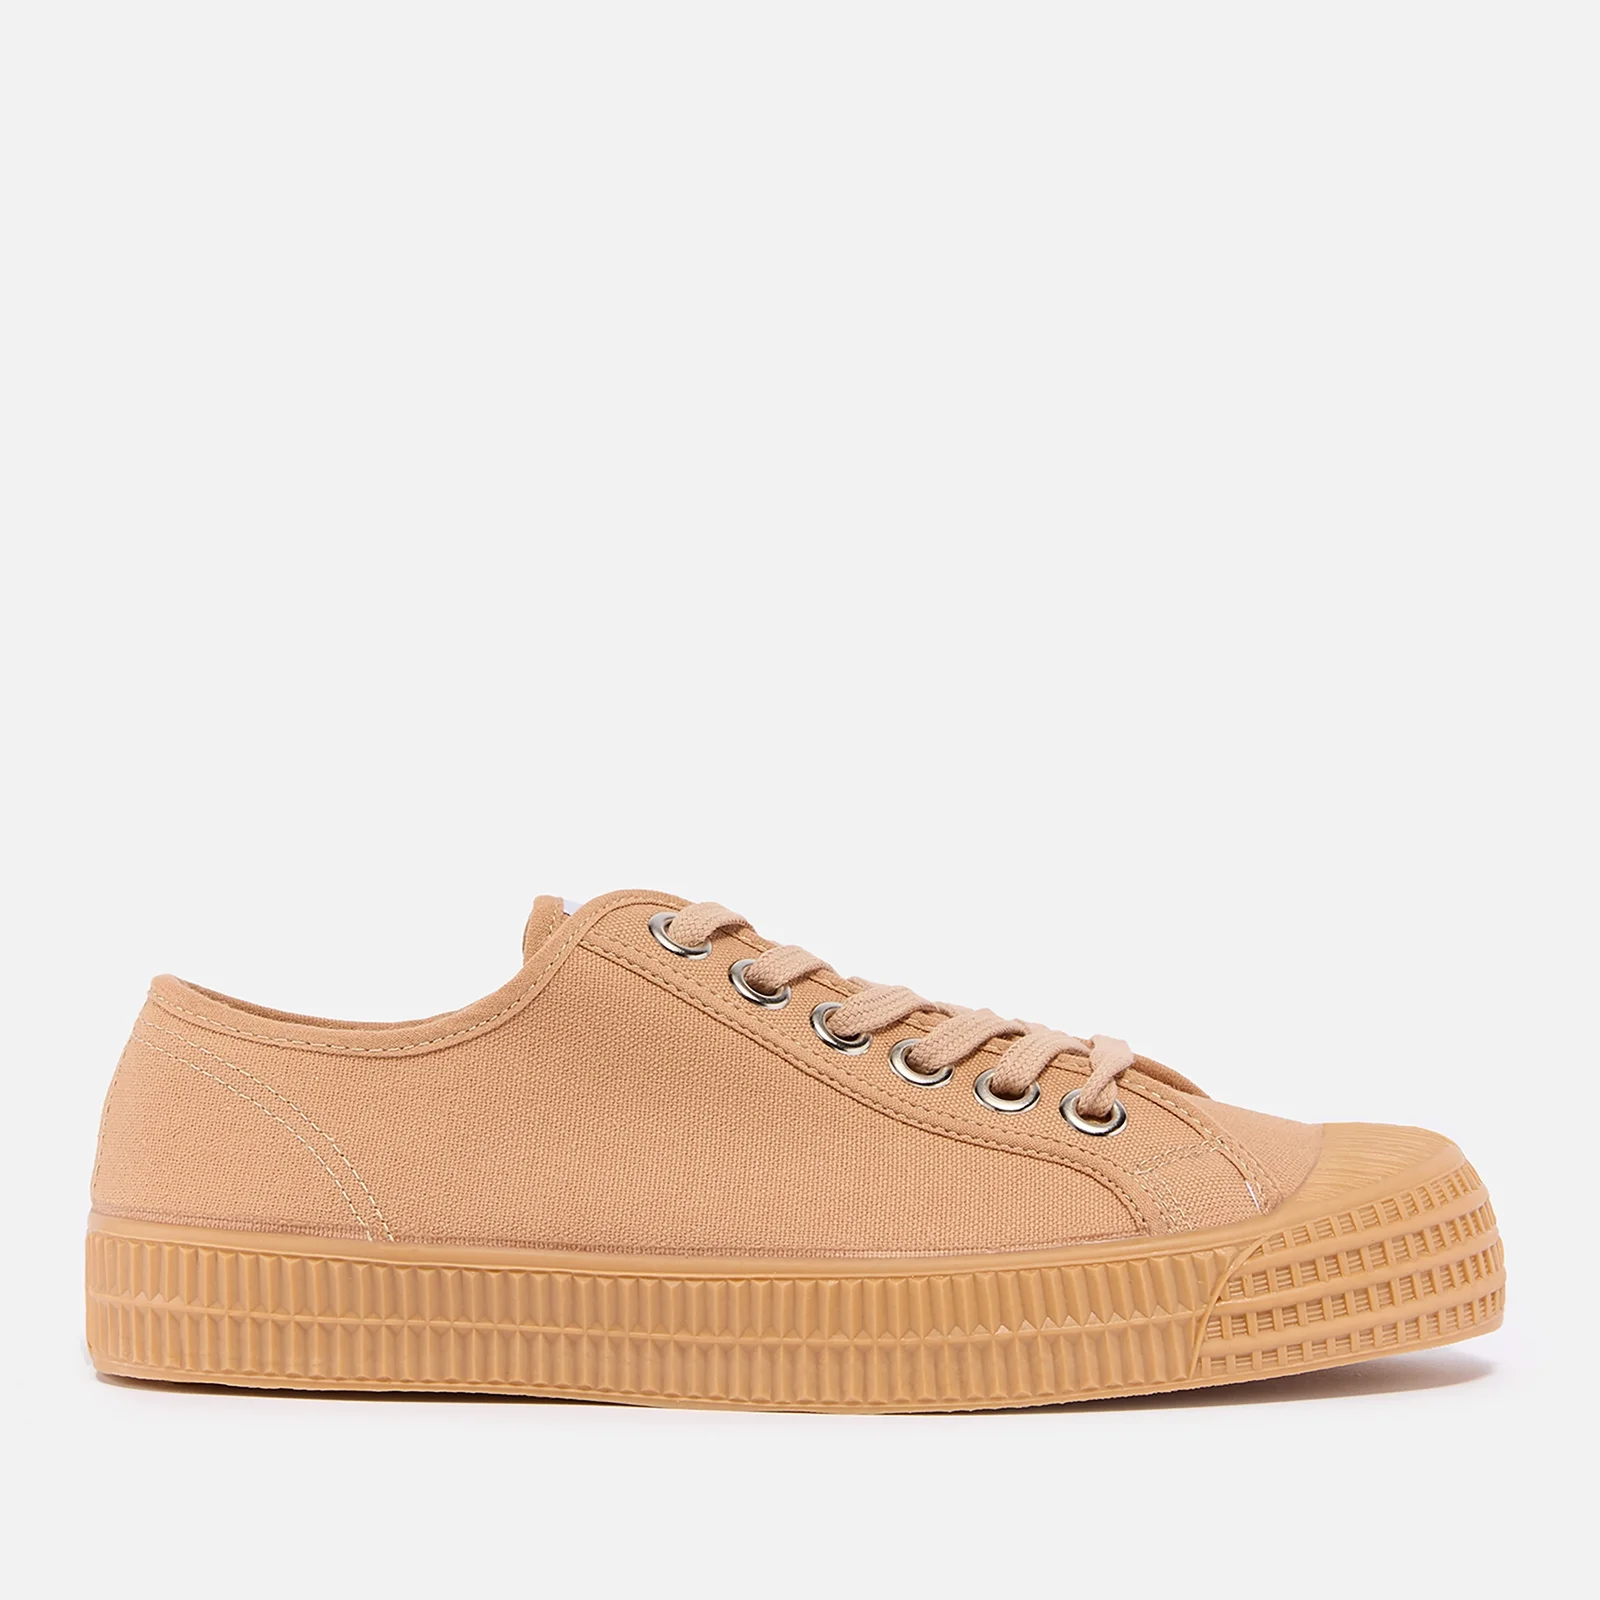 Novesta Women's Star Master Classic Canvas Trainers Image 1